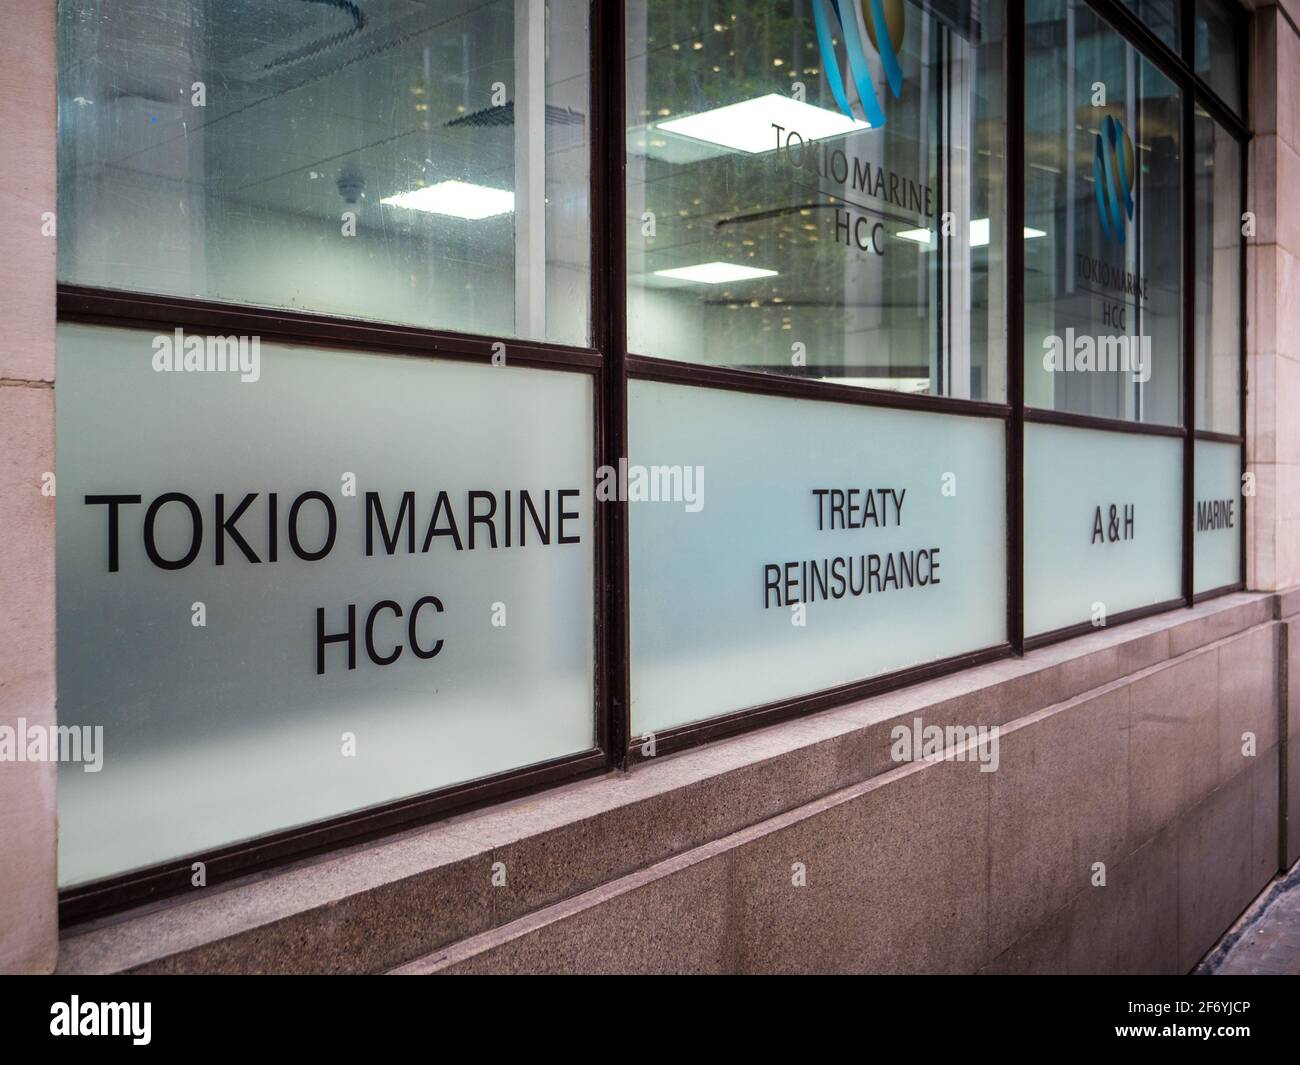 Tokio Marine HCC Insurance Company offices in the City of London financial district. Tokio Marine HCC is an international specialty insurance group. Stock Photo